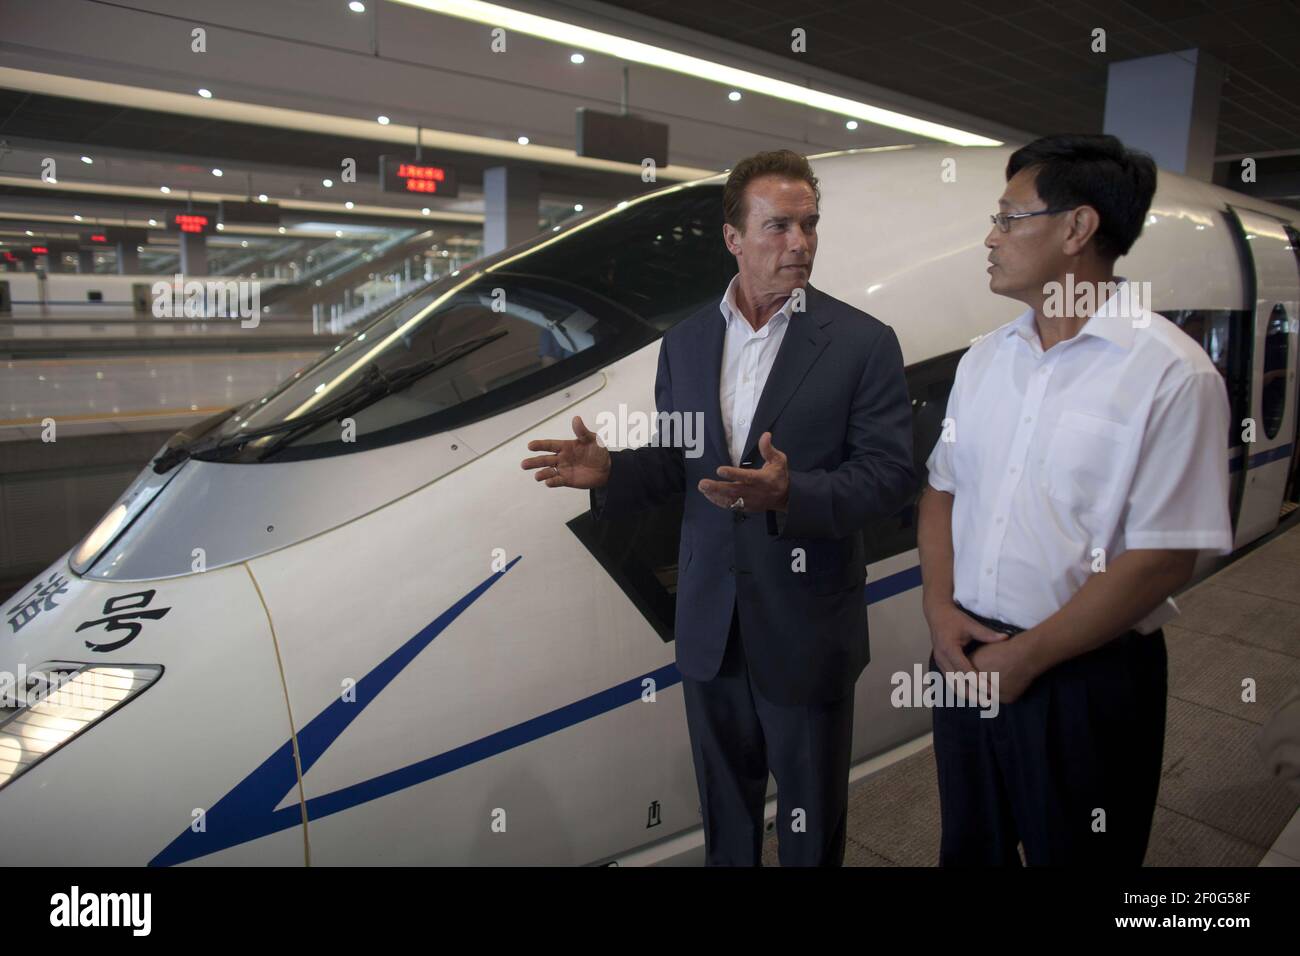 11 September 2010- Shangahi, China- Governor Arnold Schwarzenegger discusses with PeopleÃ•s Republic of China Ministry of Railways Vice Minister Lu Chunfang ChinaÃ•s high-speed rail system, the largest high-speed rail network in the world at Hongqiao Railway Station and Shanghai Railway Station in Shanghai, China. Photo Credit: Peter Grigsby/Office of the Governor/Sipa Press/arnoldchina.011/1009122049 Stock Photo